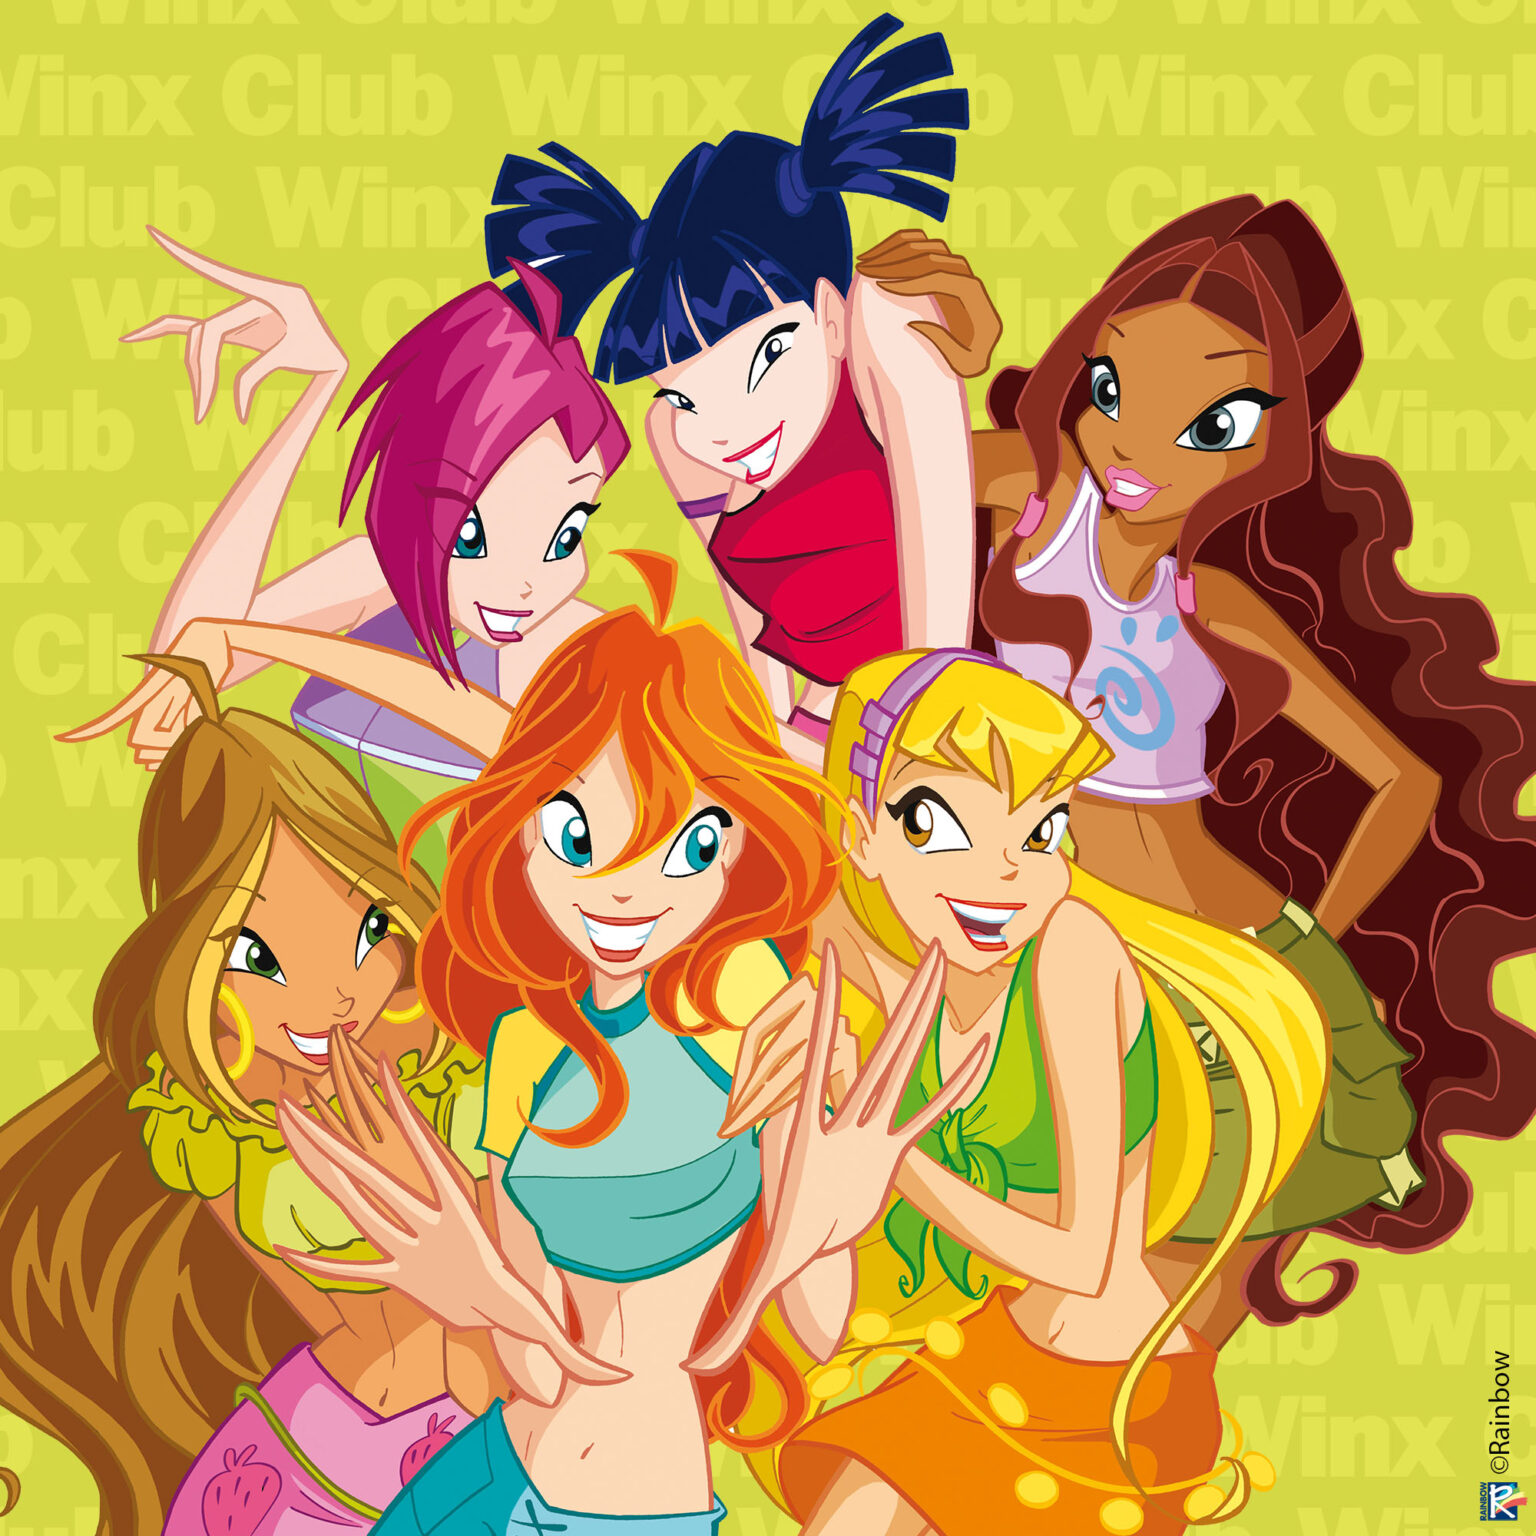 The Winx Club fairies are back and bringing their magic to comics ...